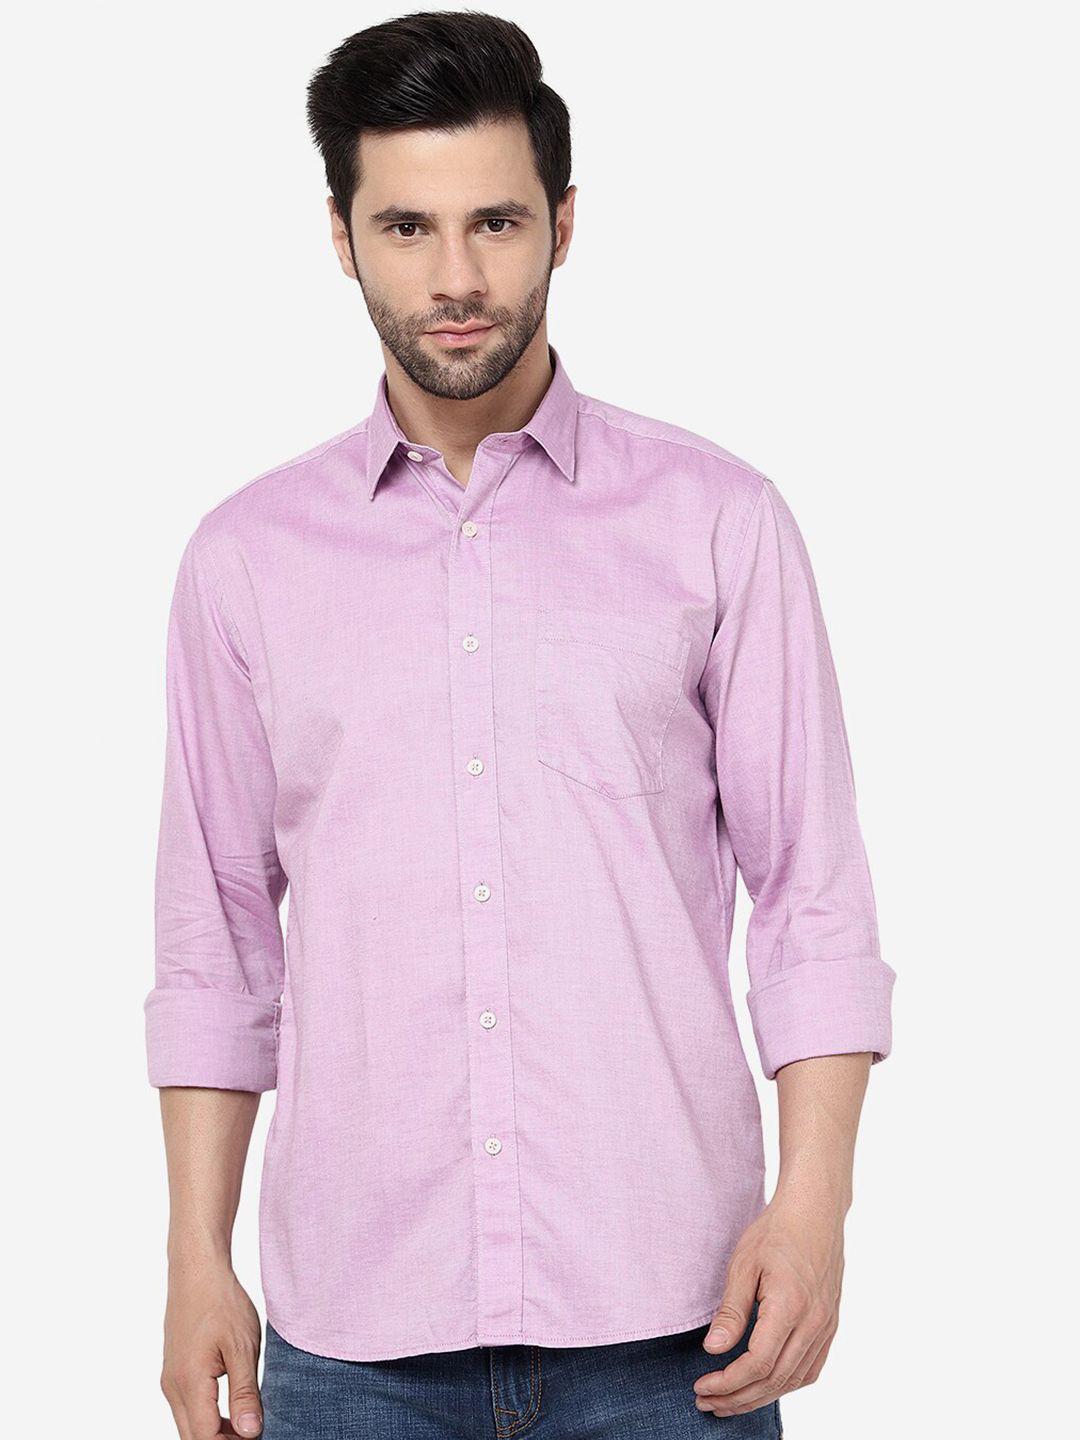 jade blue slim fit pure cotton casual shirt